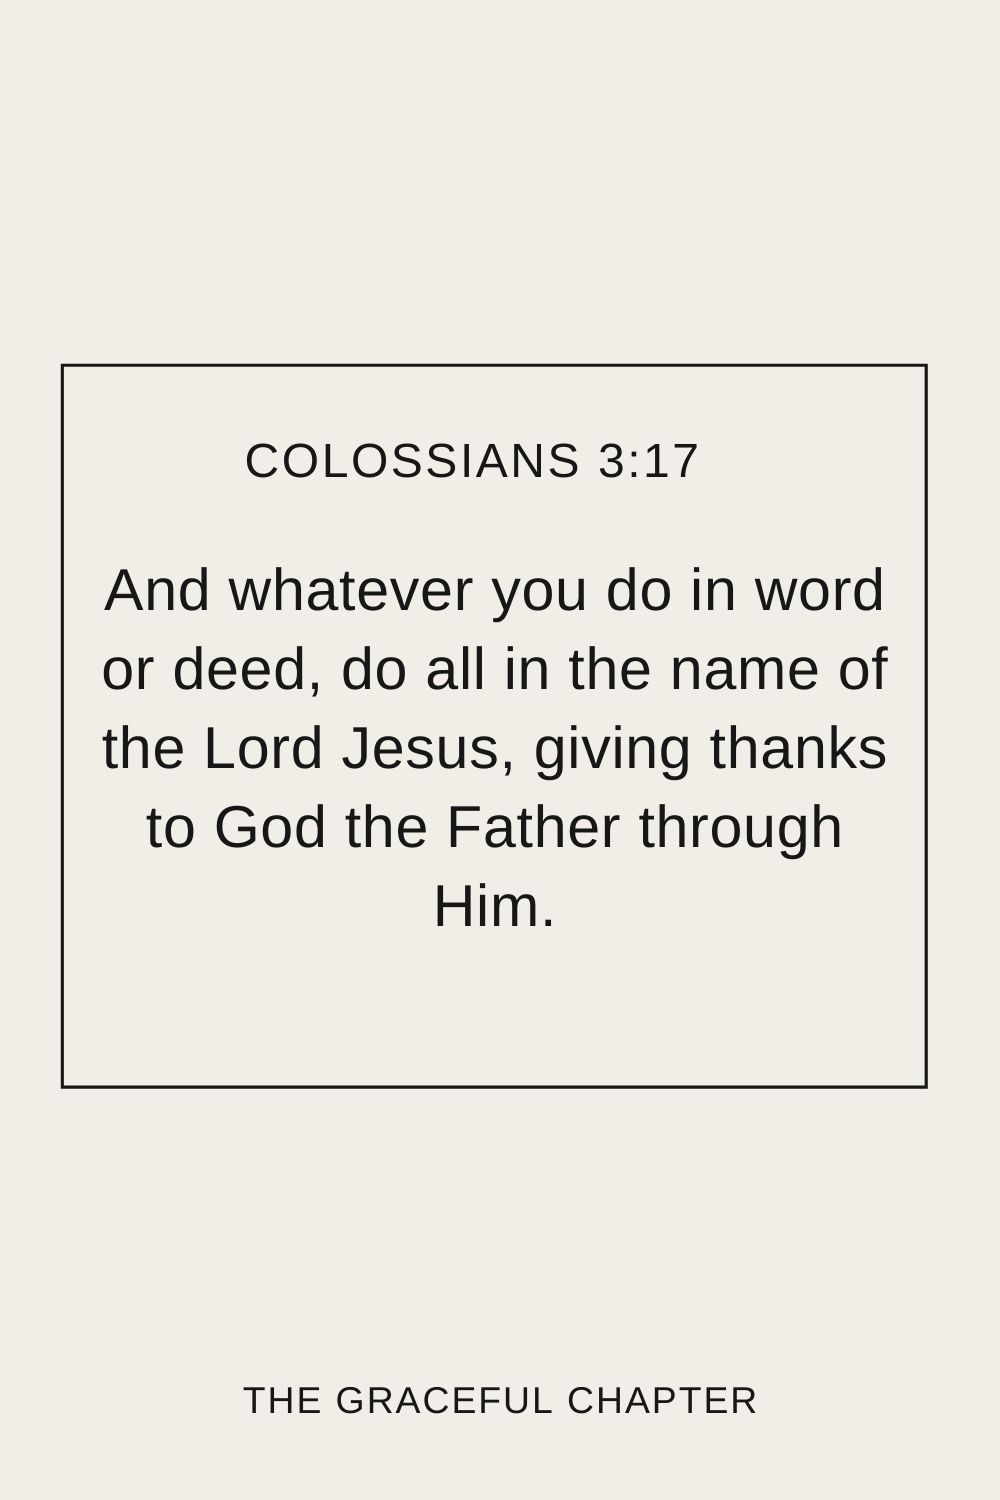 And whatever you do in word or deed, do all in the name of the Lord Jesus, giving thanks to God the Father through Him. Colossians 3:17